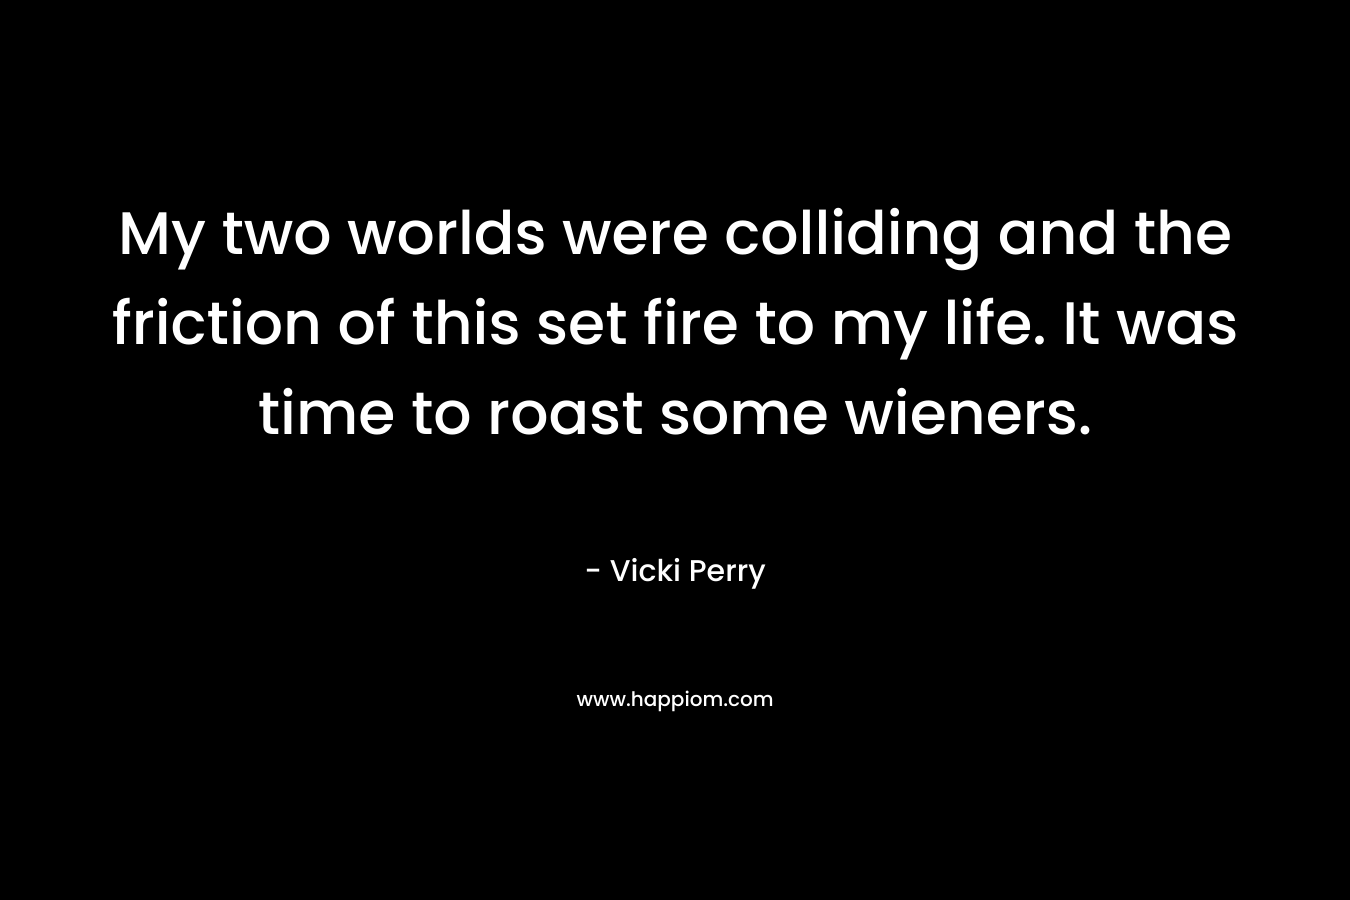 My two worlds were colliding and the friction of this set fire to my life. It was time to roast some wieners.